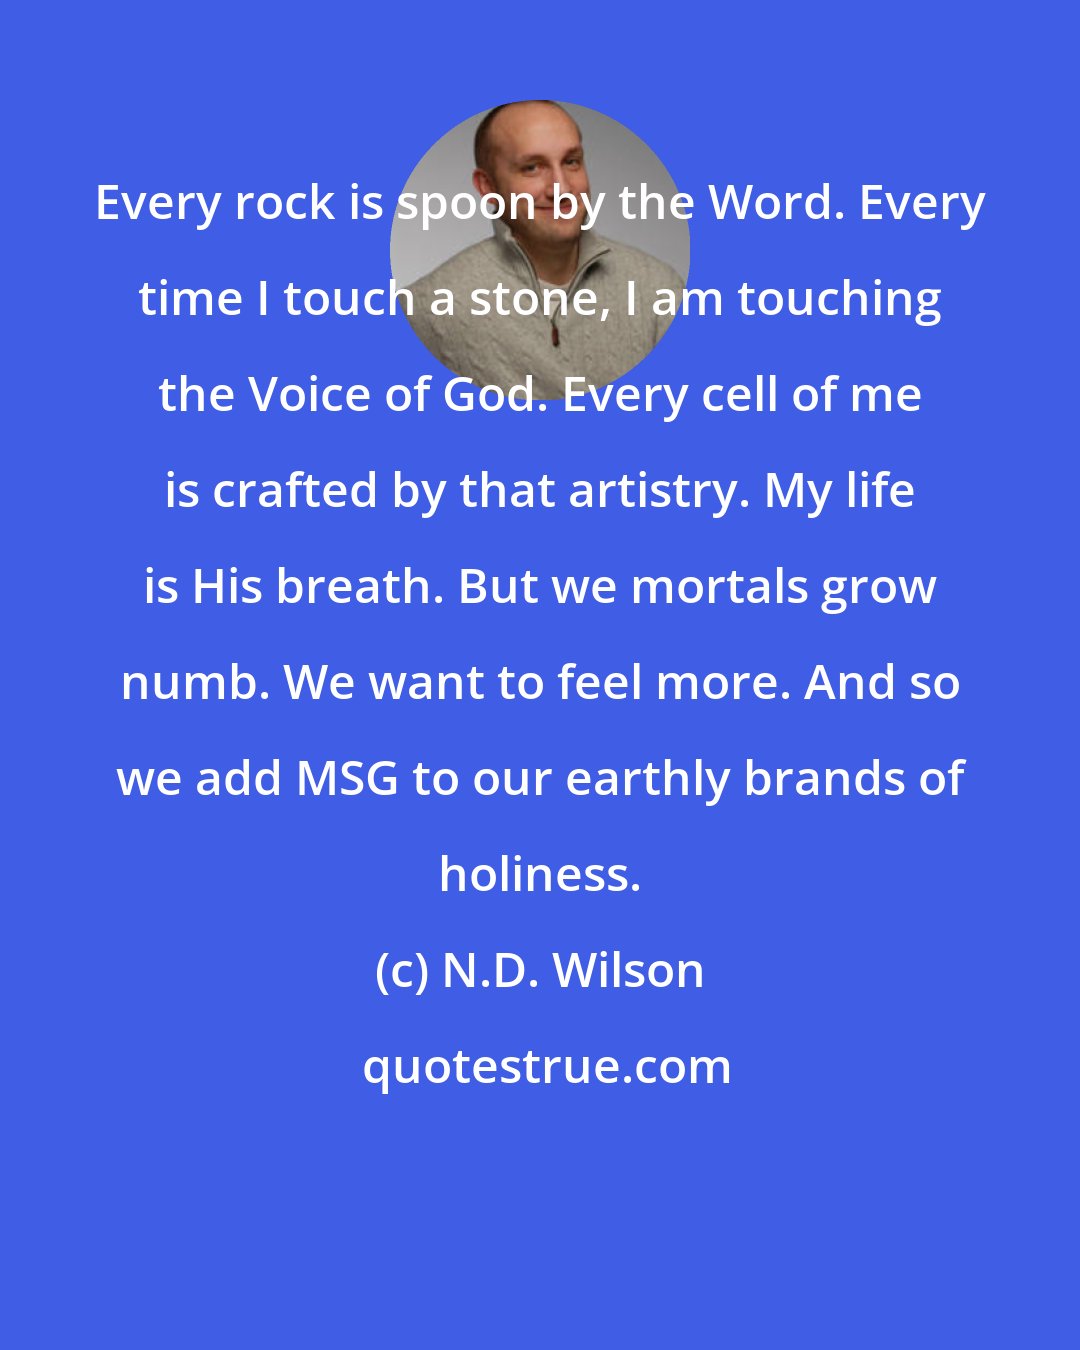 N.D. Wilson: Every rock is spoon by the Word. Every time I touch a stone, I am touching the Voice of God. Every cell of me is crafted by that artistry. My life is His breath. But we mortals grow numb. We want to feel more. And so we add MSG to our earthly brands of holiness.